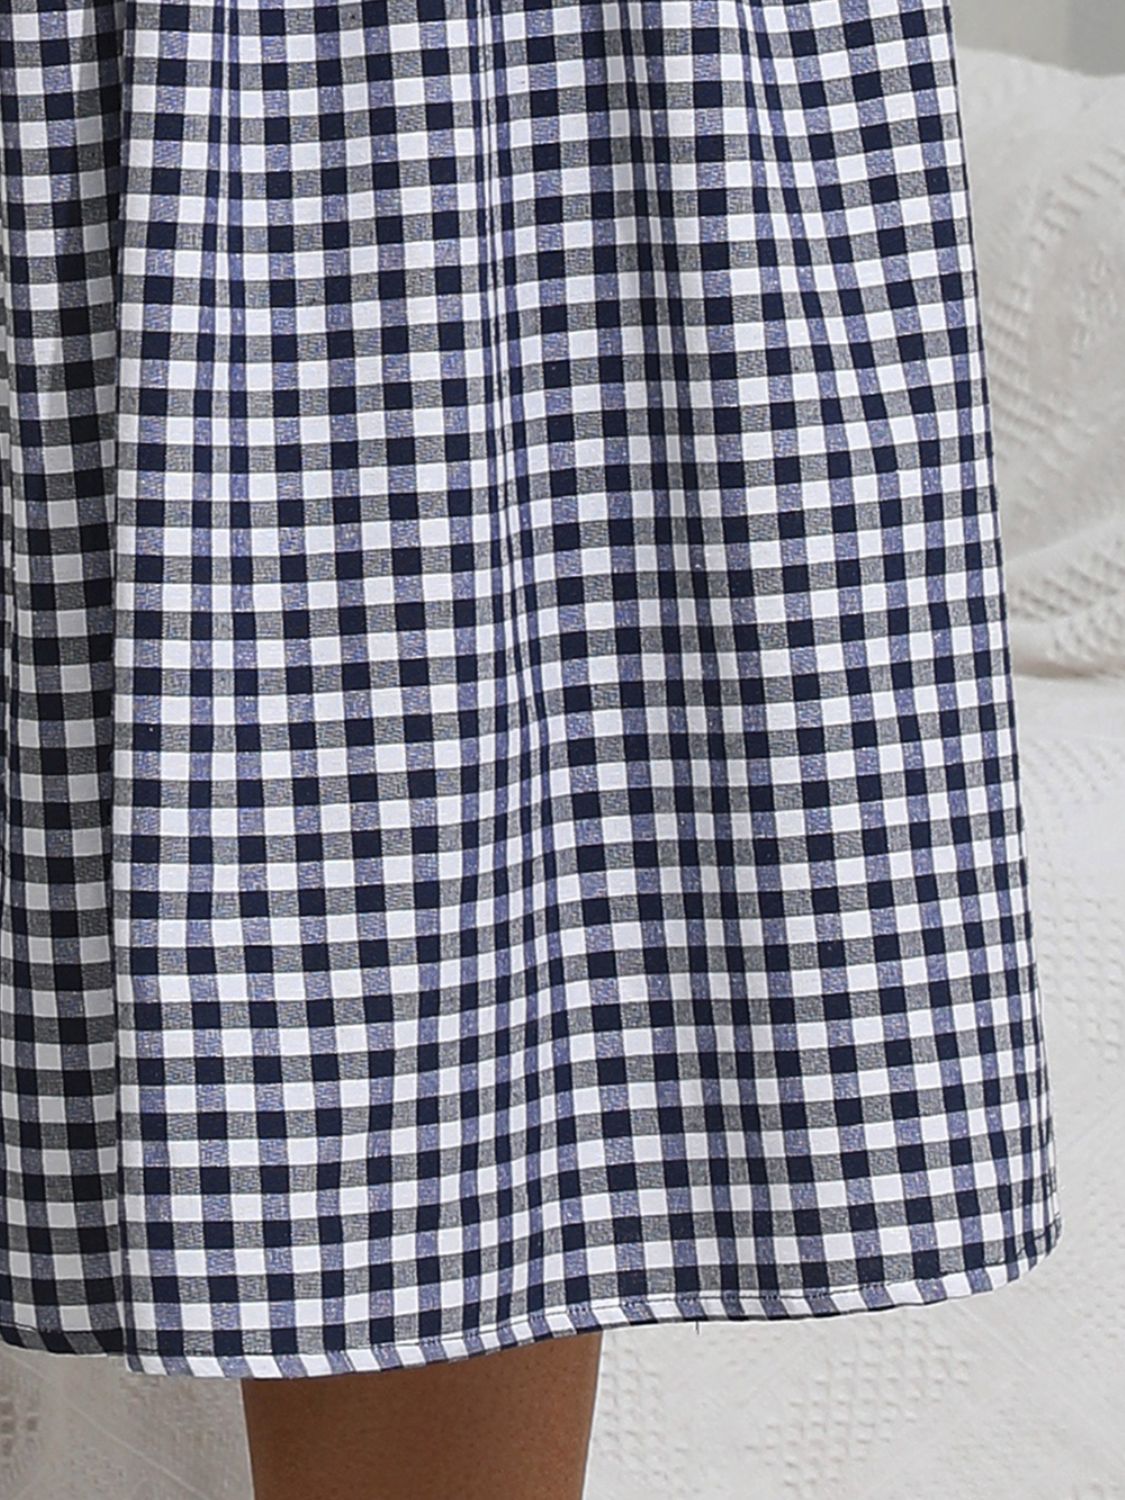 Casual blue gingham dress with a smocked top and midi length